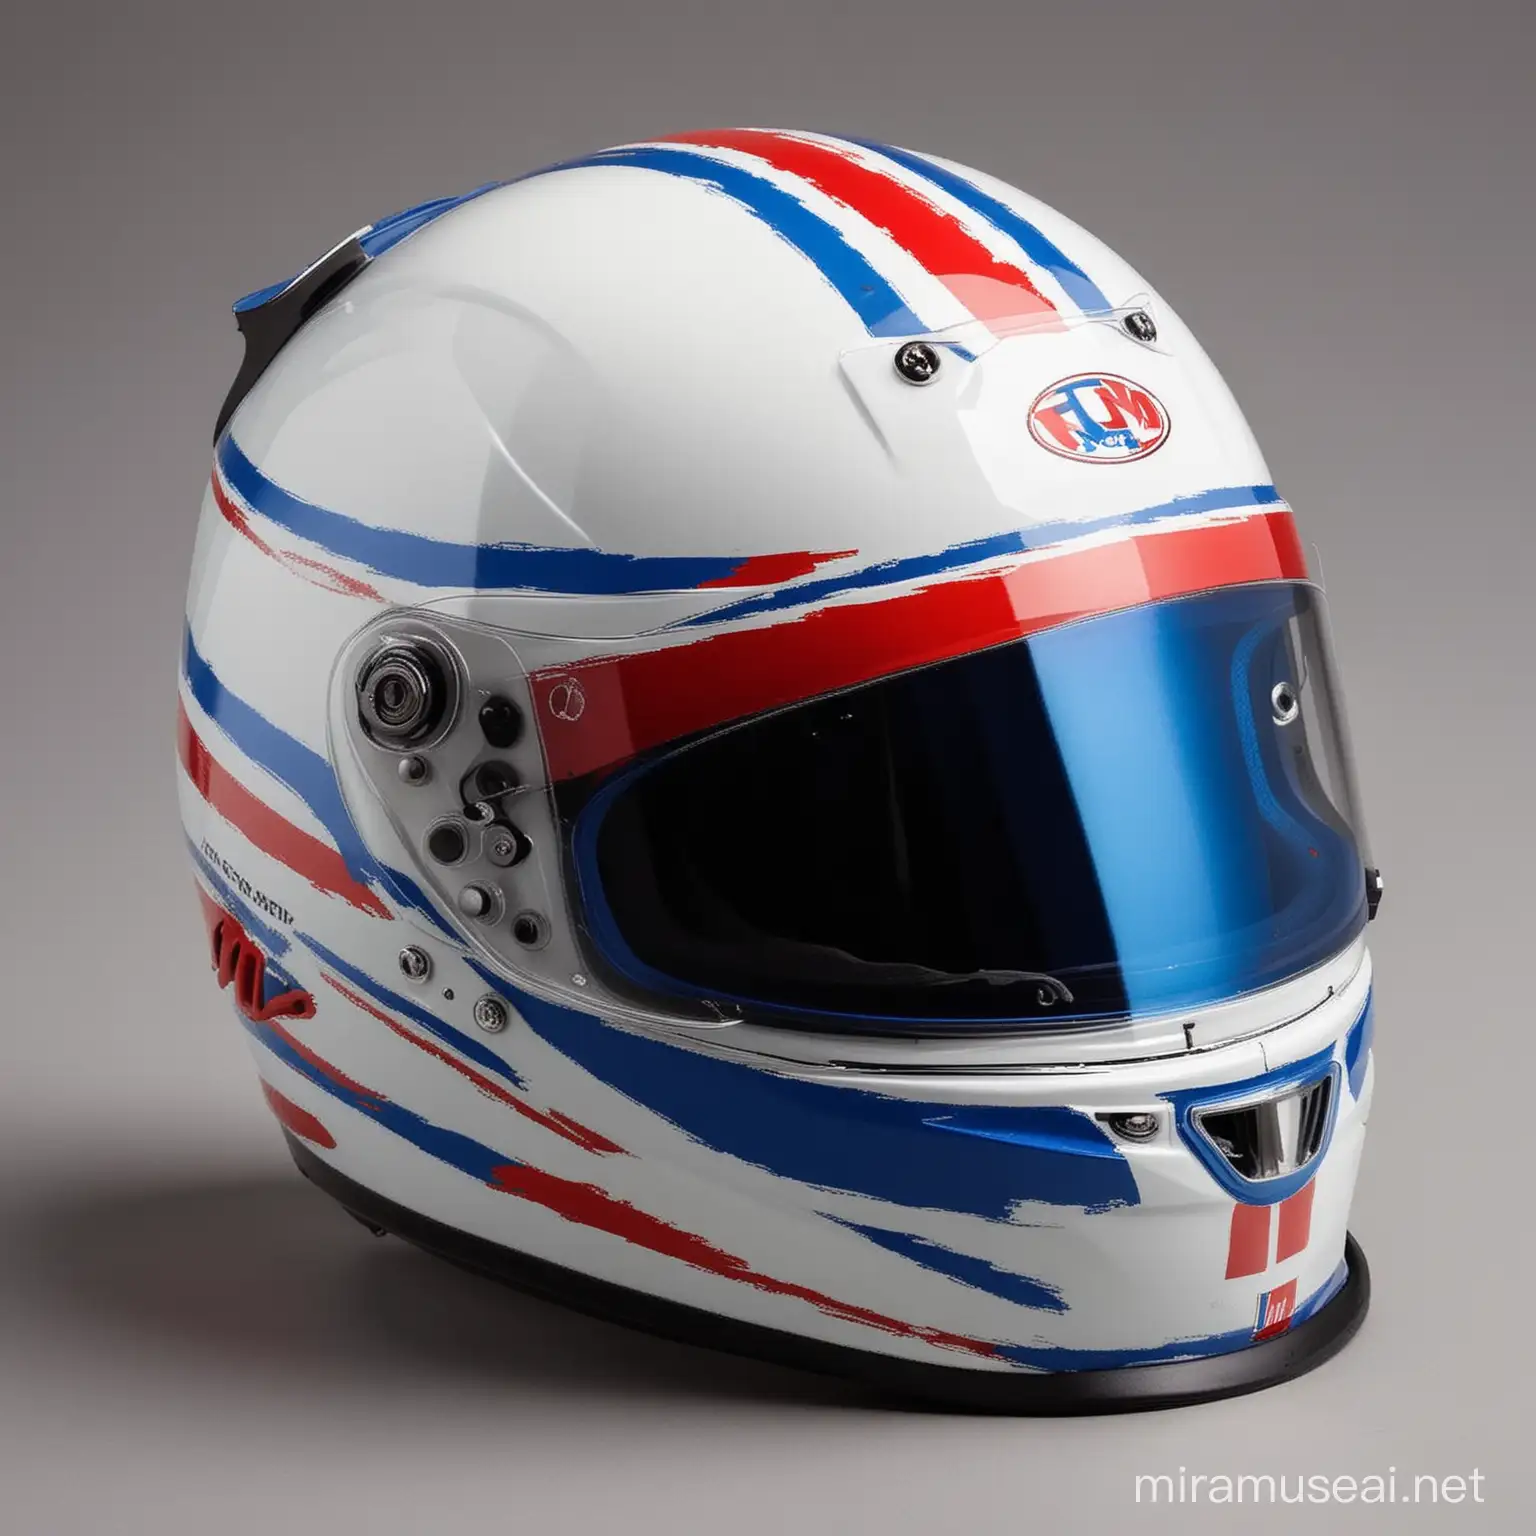 A racing helmet that is white and blue with red lines